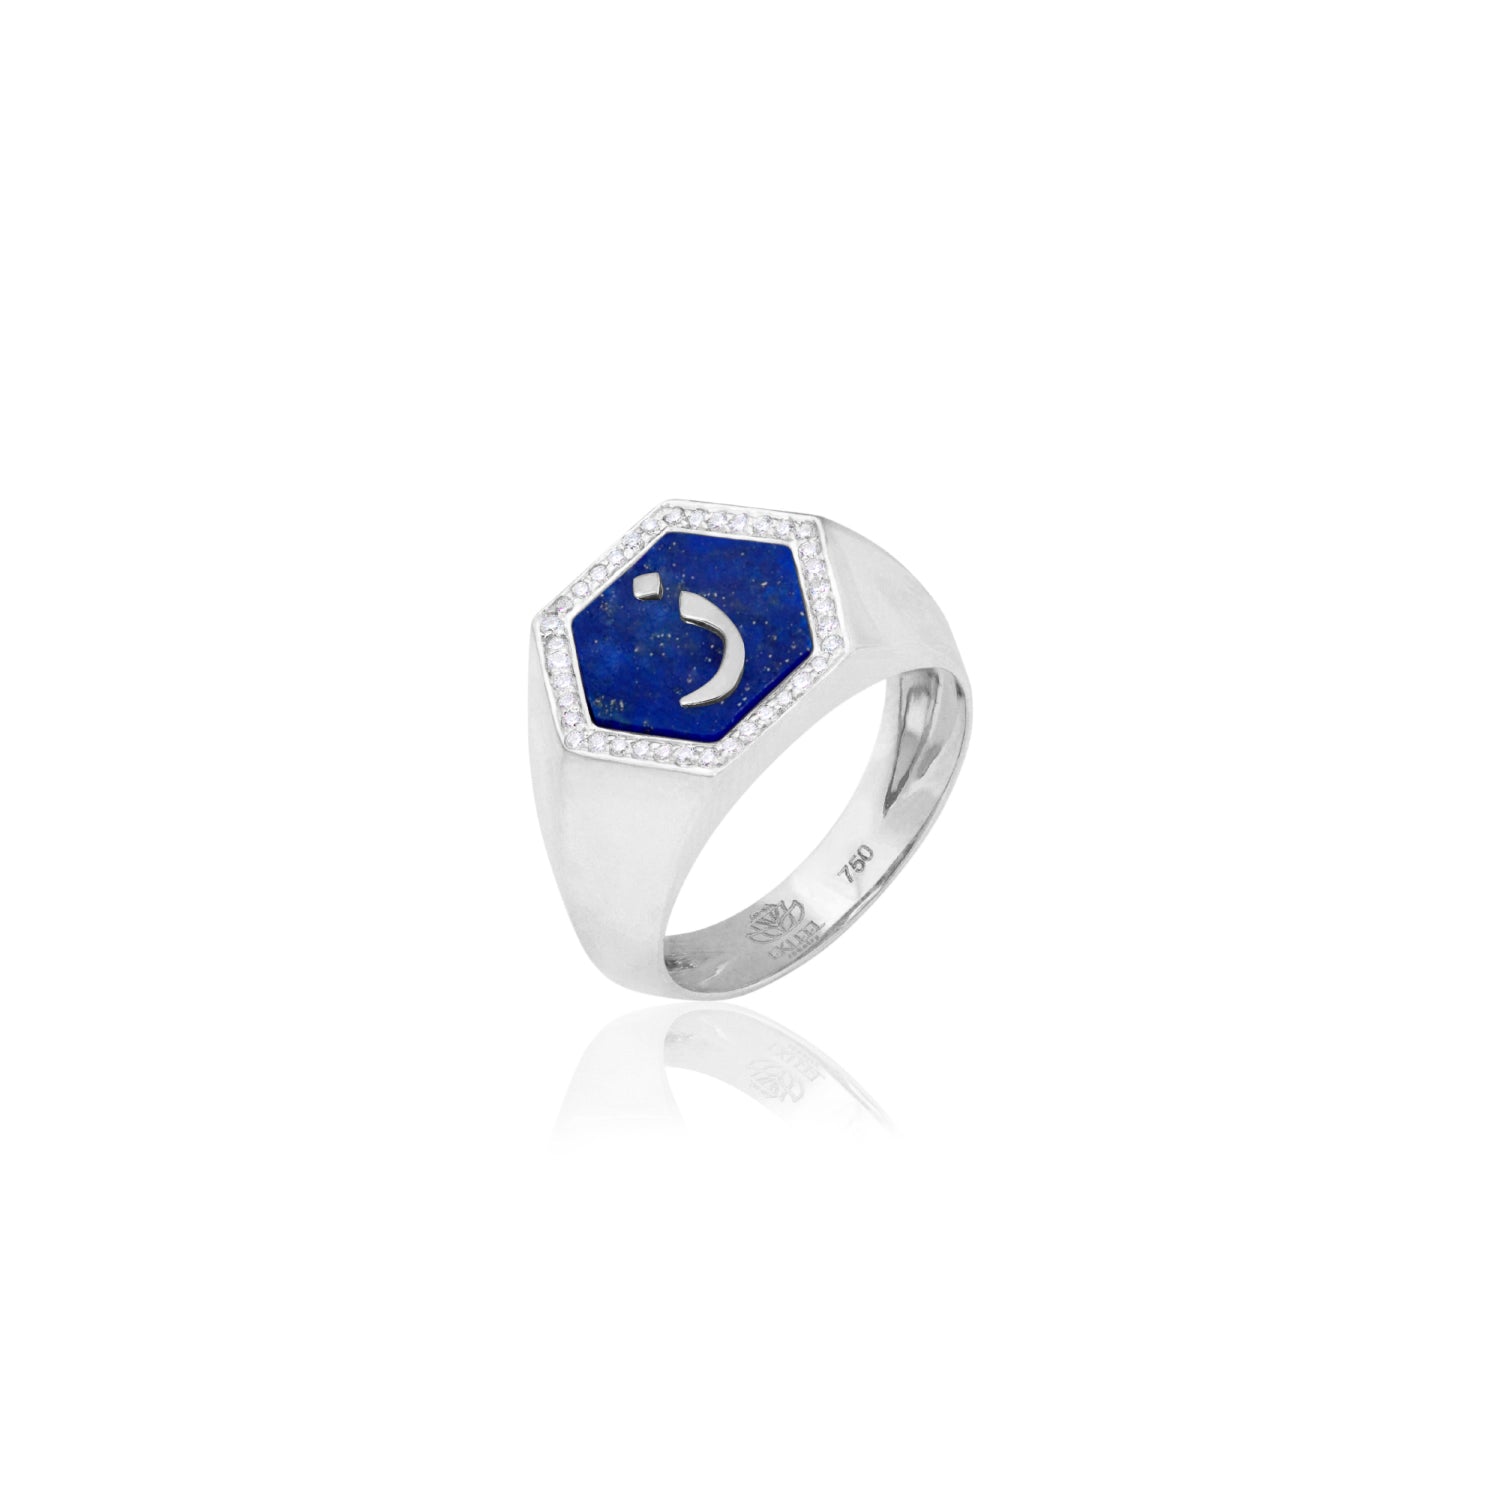 Qamoos 2.0 Letter ز Lapis Lazuli and Diamond Signet Ring in White Gold